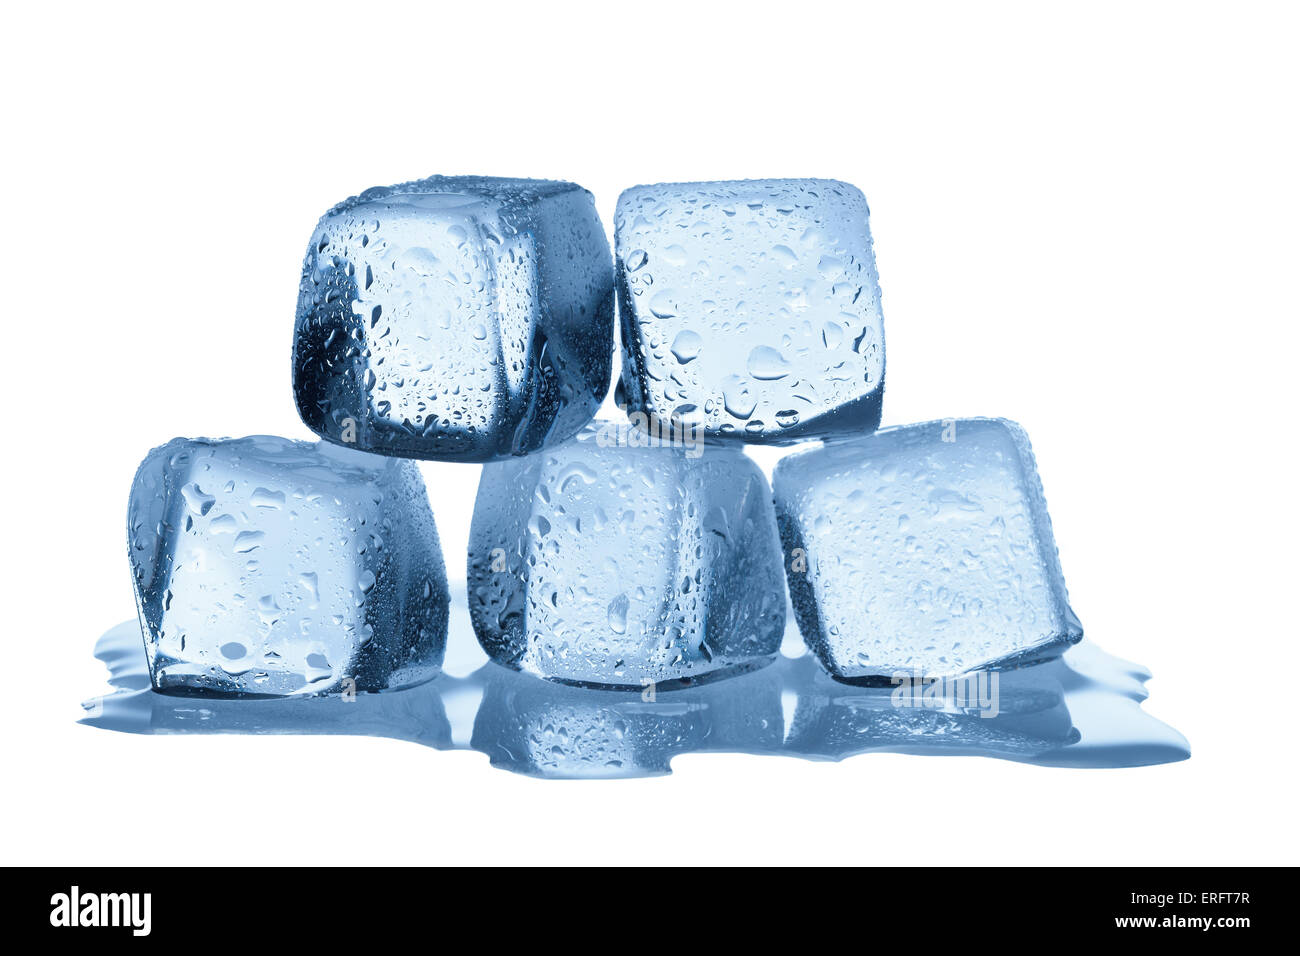 https://c8.alamy.com/comp/ERFT7R/group-of-melting-ice-cubes-isolated-on-white-background-ERFT7R.jpg